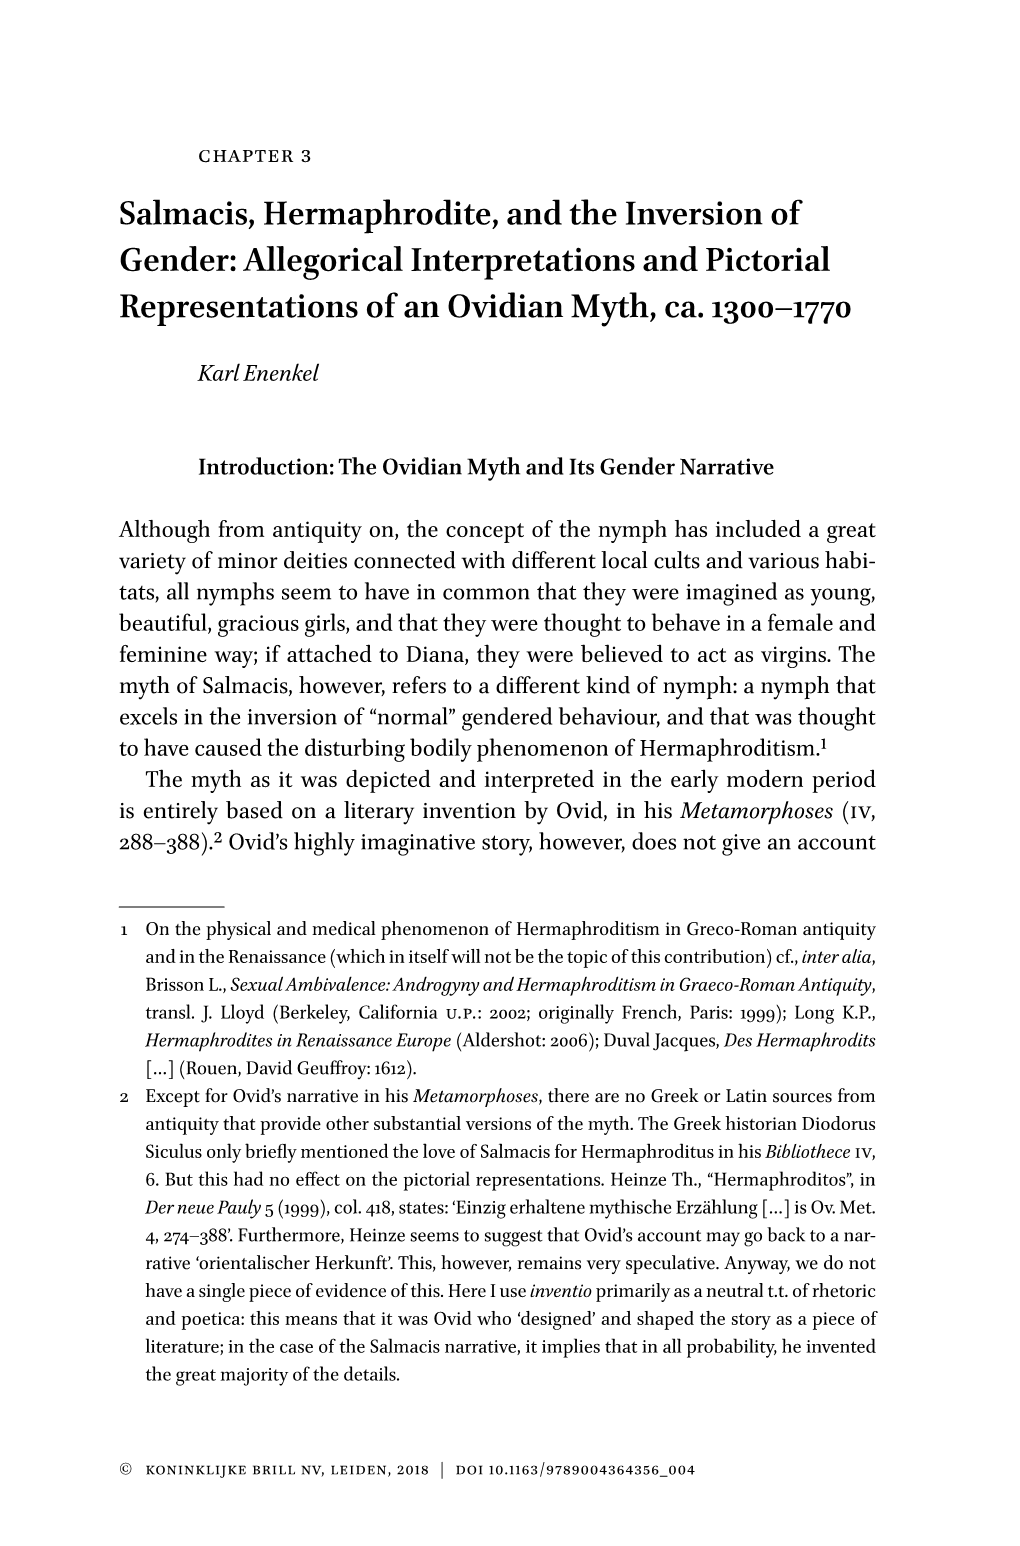 Salmacis, Hermaphrodite, and the Inversion of Gender: Allegorical Interpretations and Pictorial Representations of an Ovidian Myth, Ca